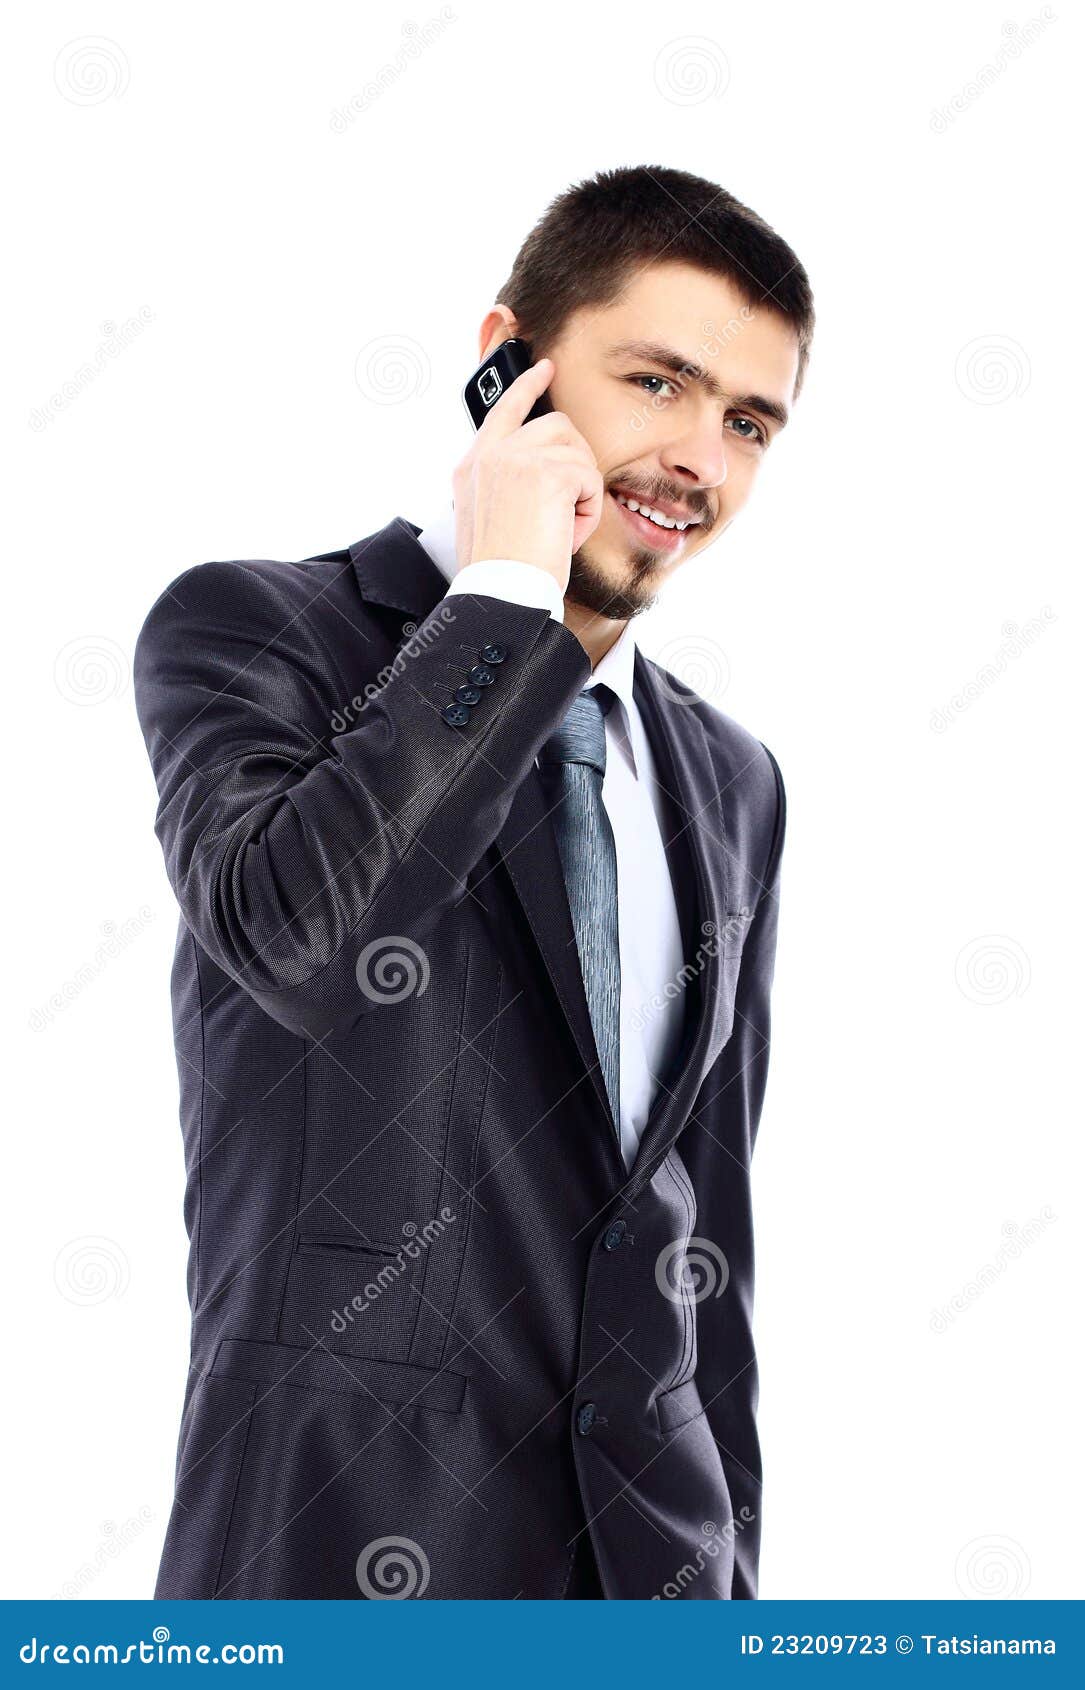 Handsome Business Man Using Cell Phone, Smiling Stock Image - Image of